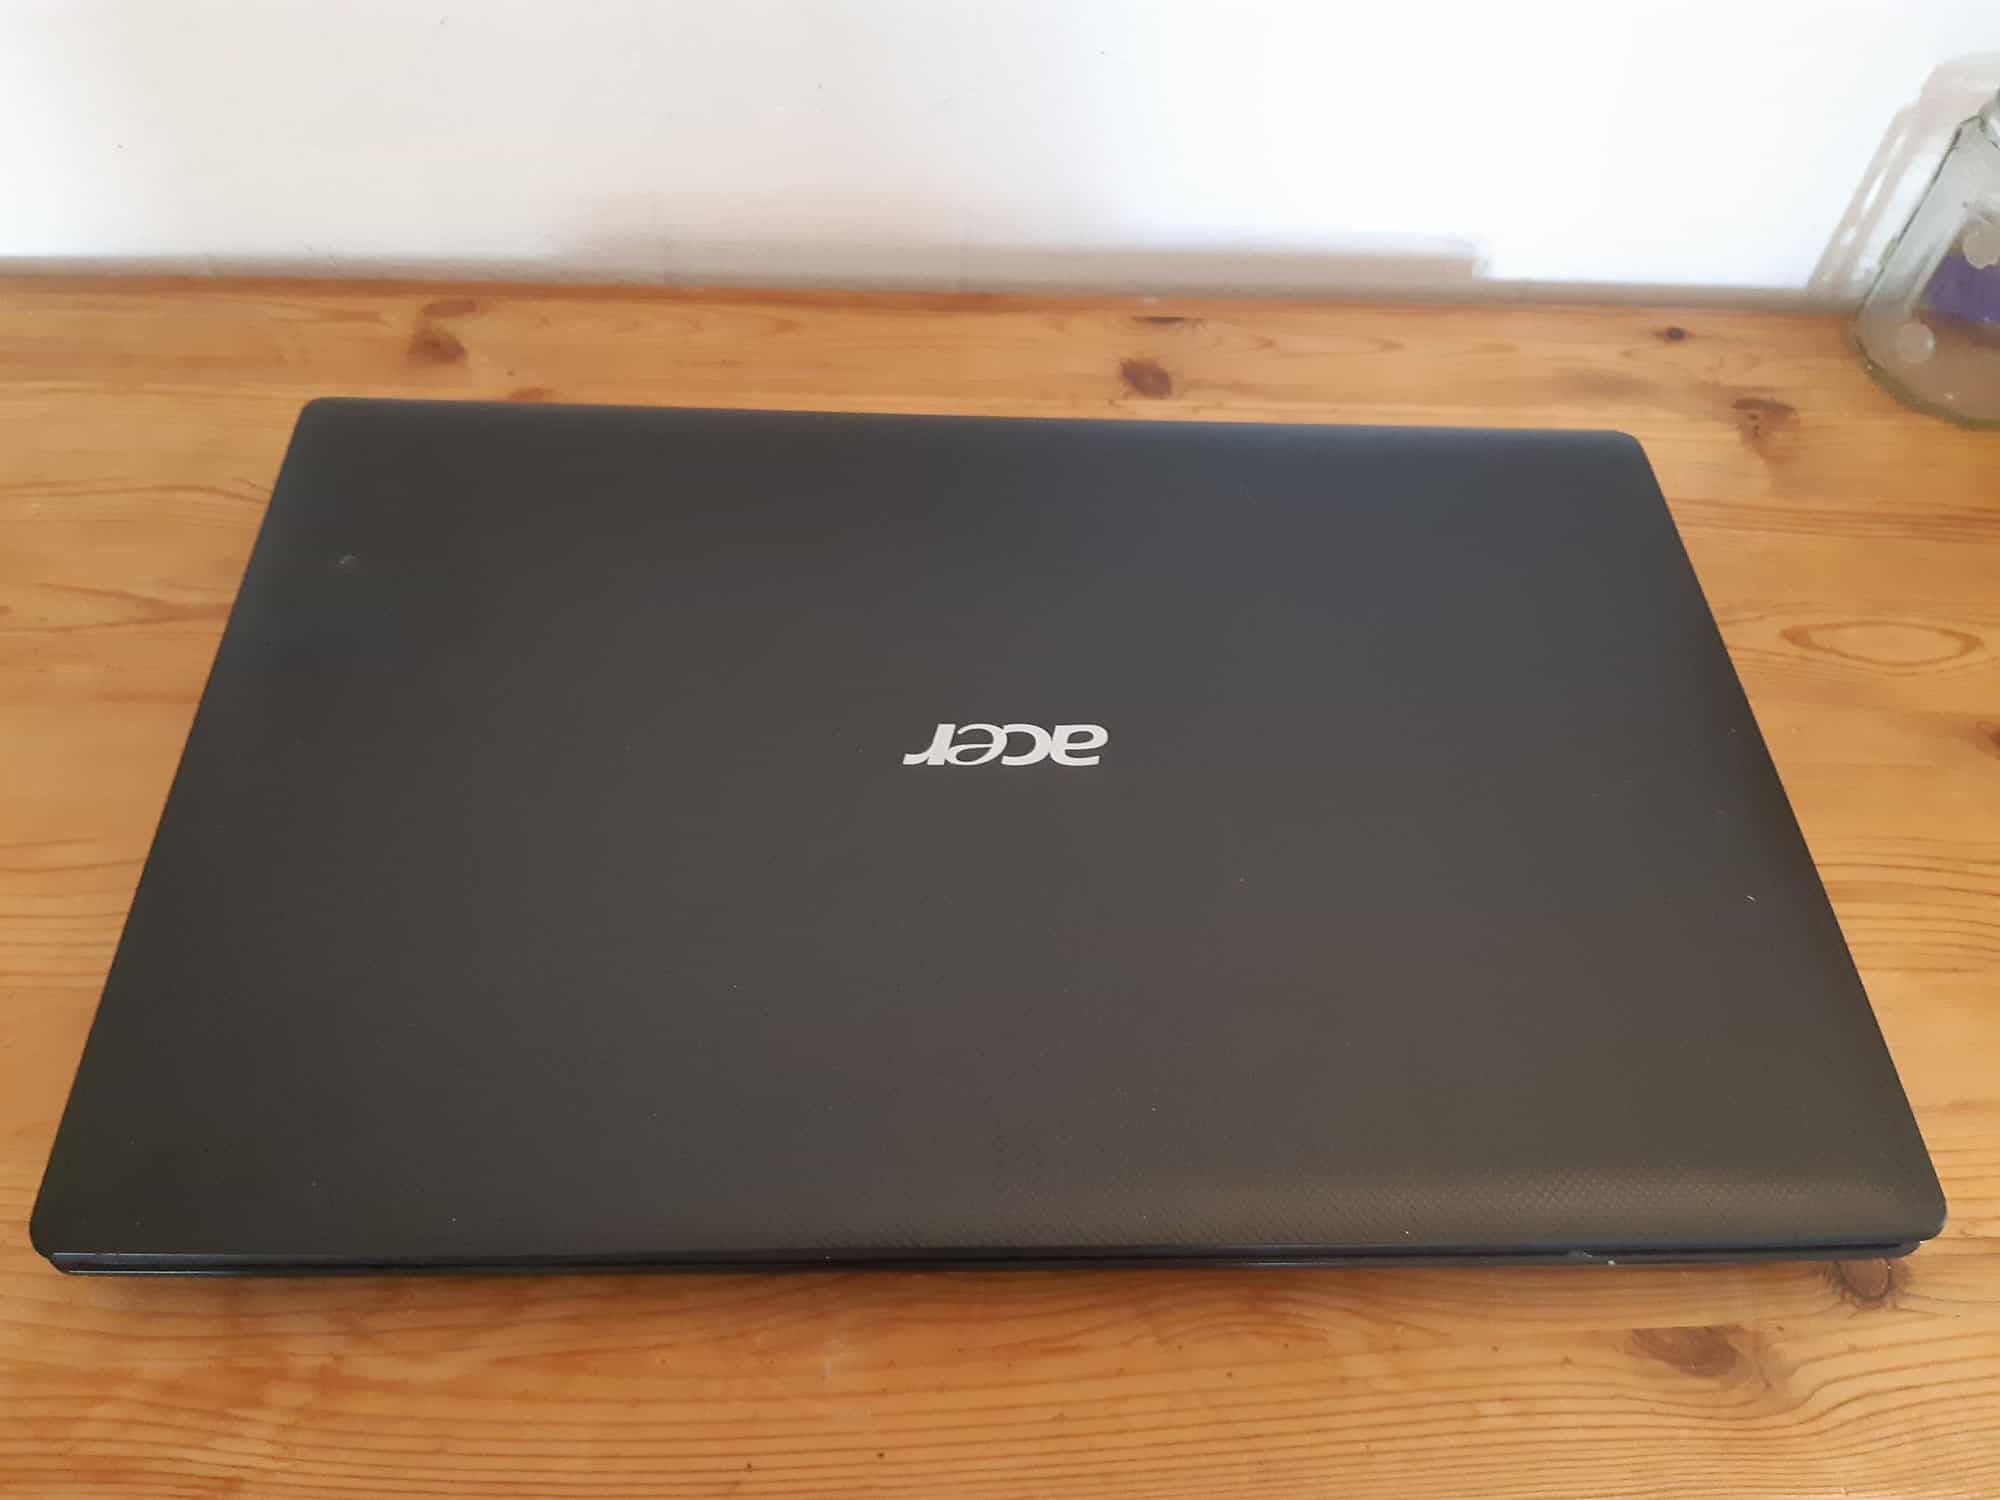 Acer Aspire 5552 picture of lid